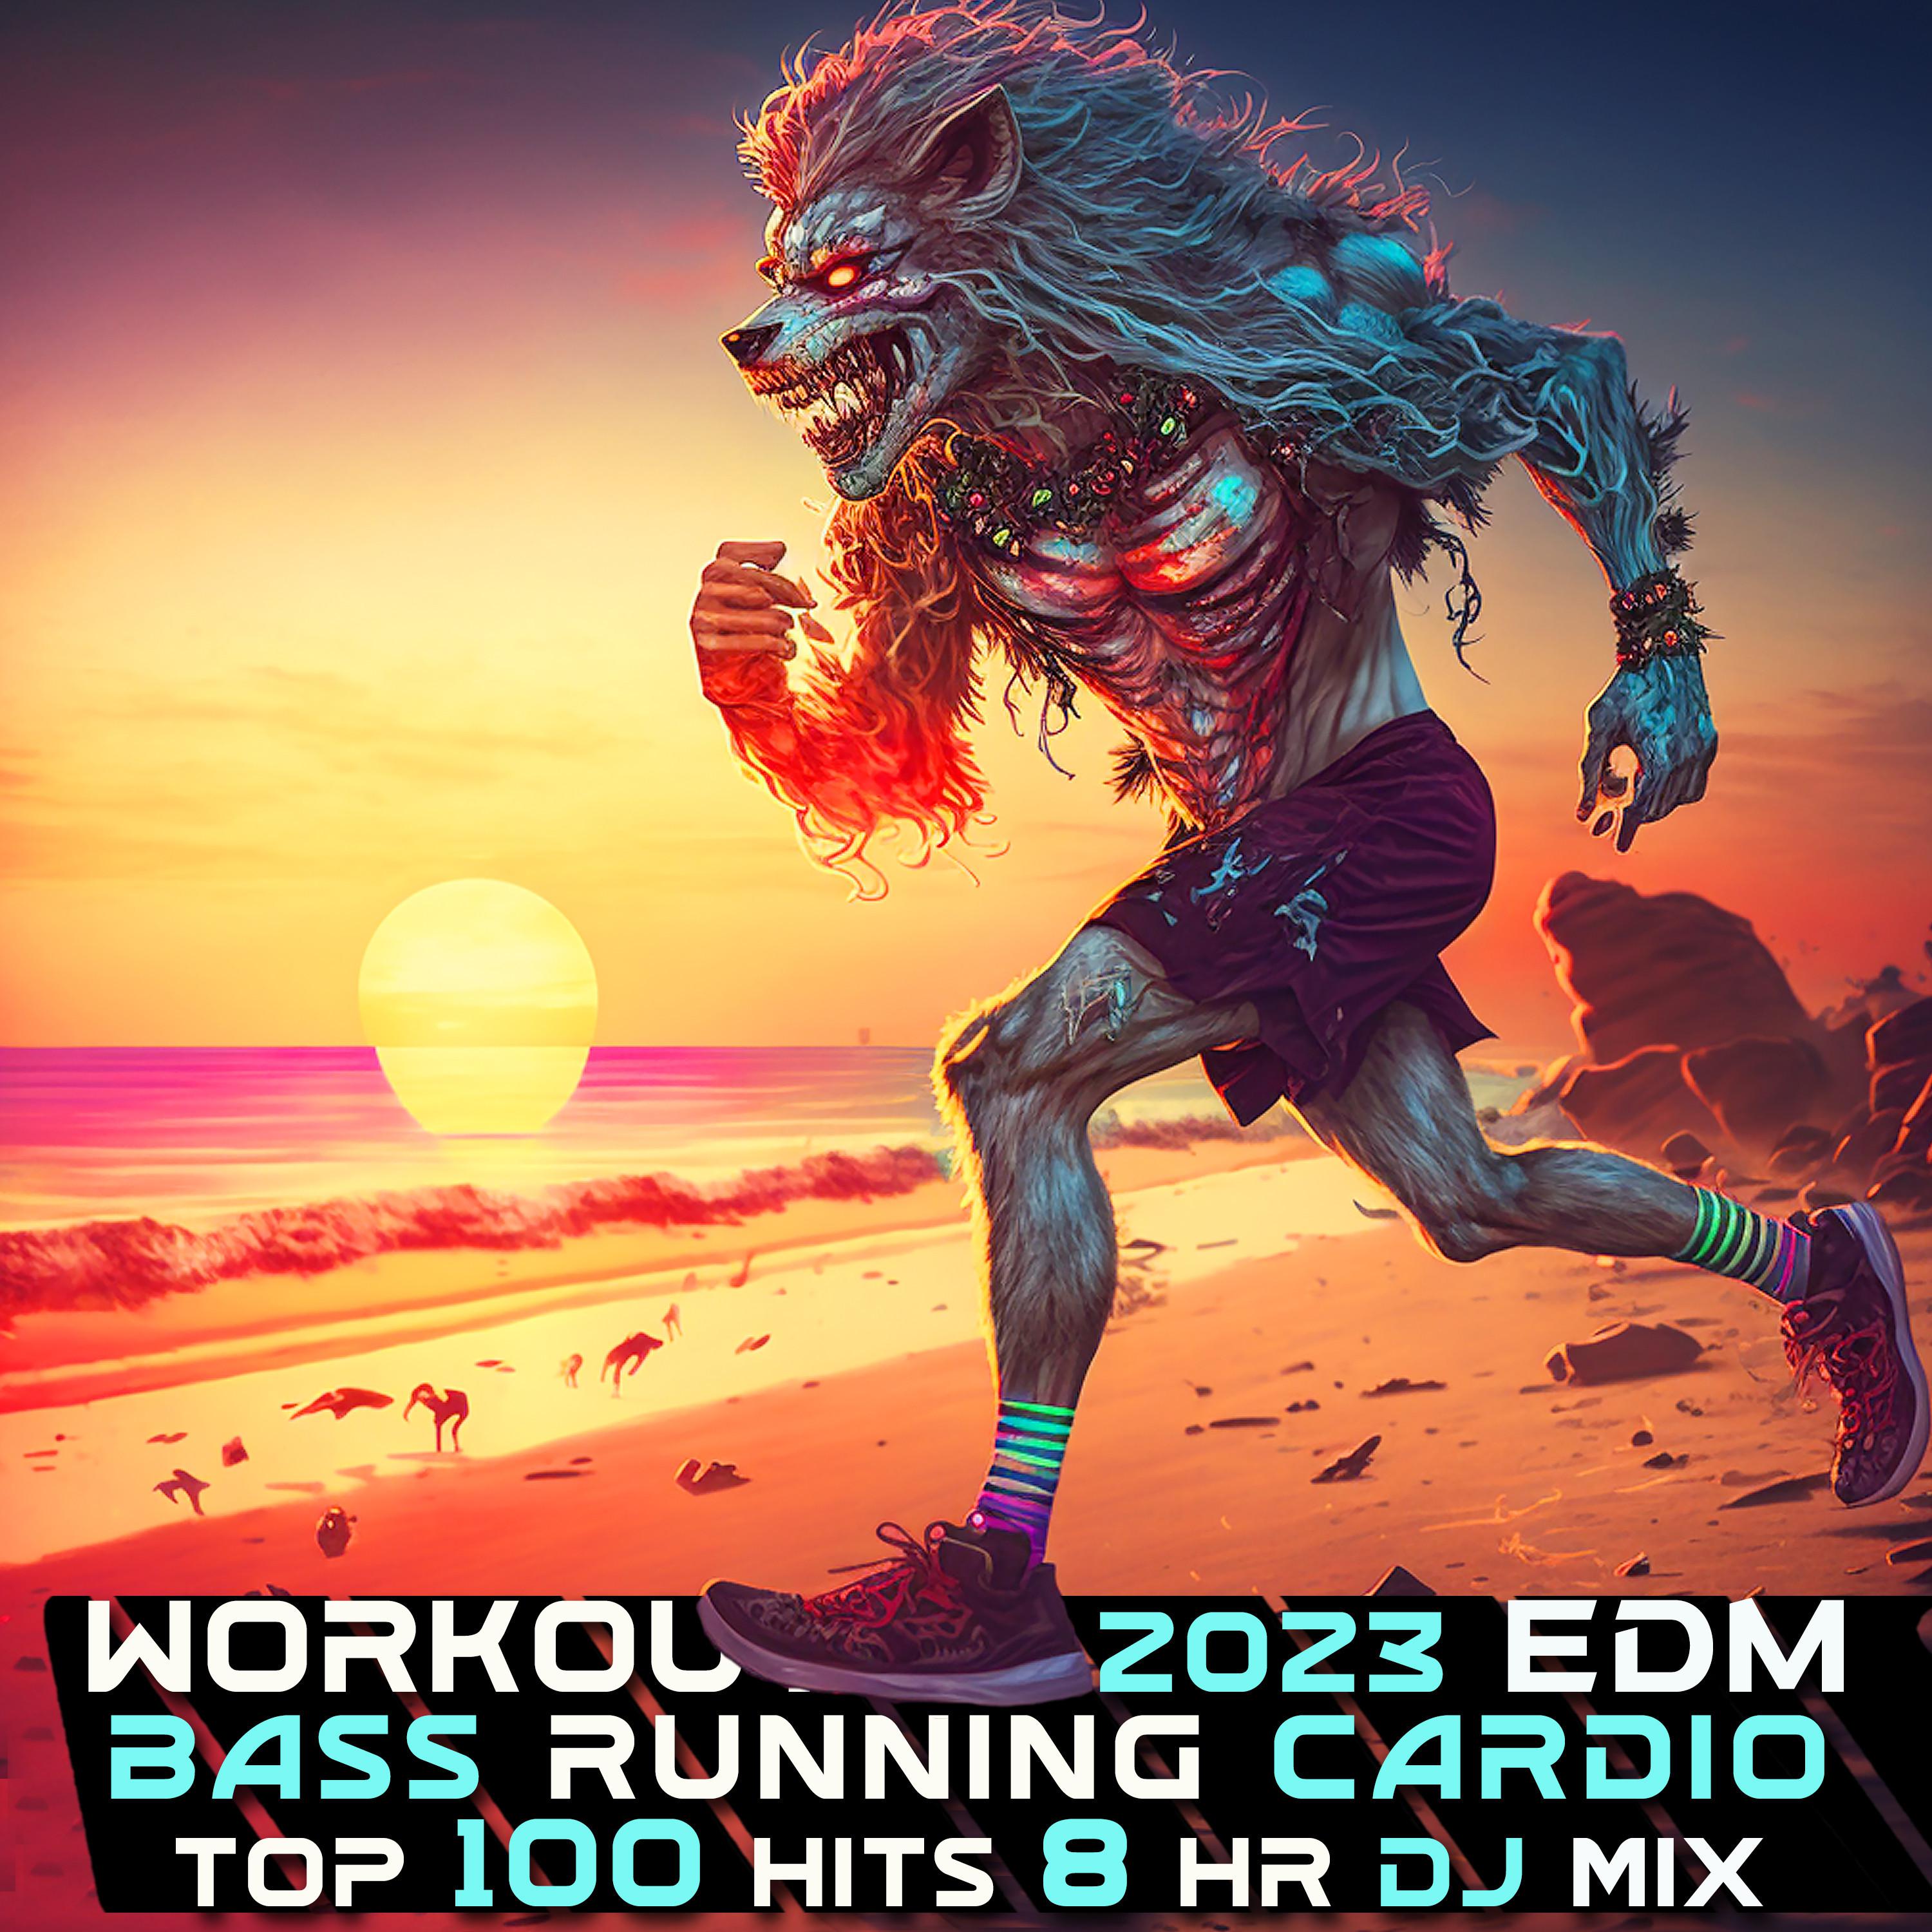 Workout Electronica - Put Bag Over Workout Shoes (Dubstep Mixed)